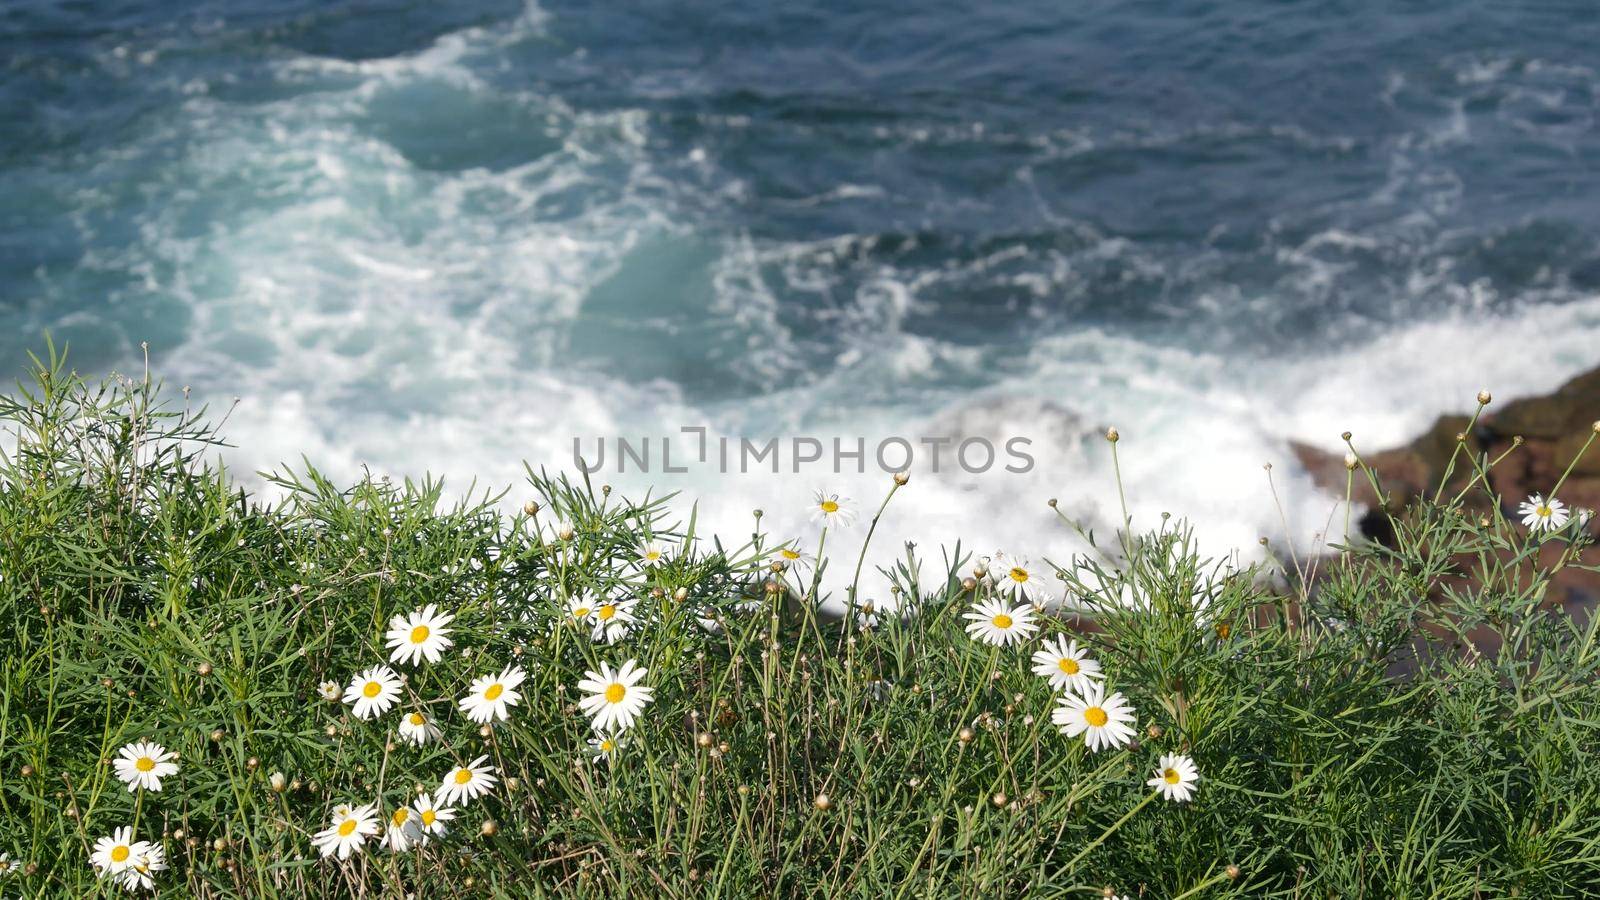 Simple white oxeye daisies in green grass over pacific ocean splashing waves. Wildflowers on the steep cliff. Tender marguerites in bloom near waters edge in La Jolla Cove San Diego, California USA.